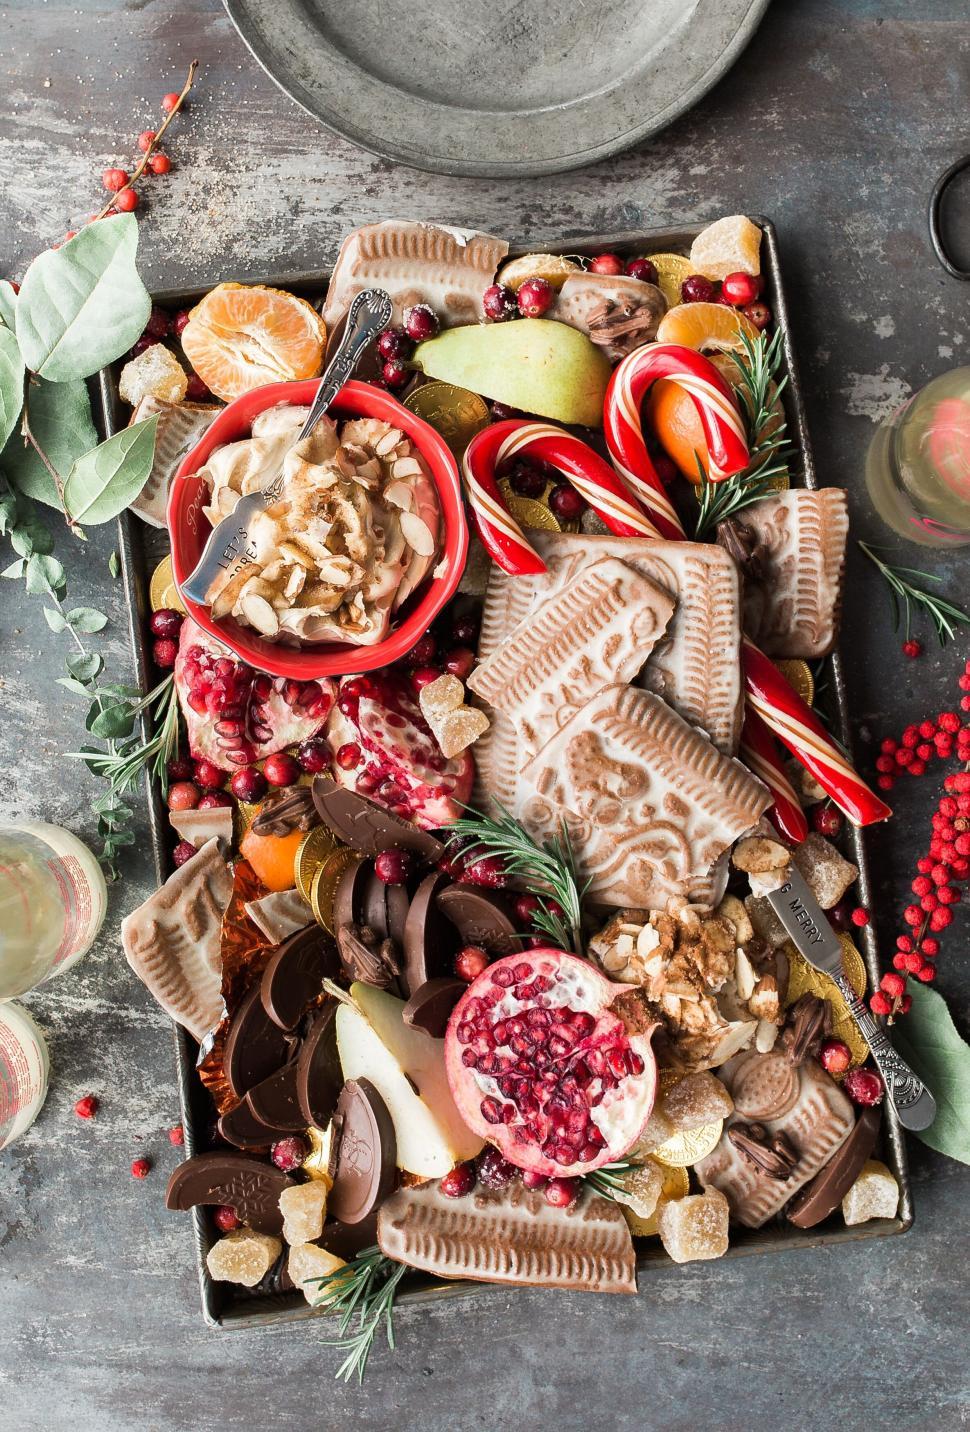 Free Image of Gourmet chocolate and fruit platter overhead 